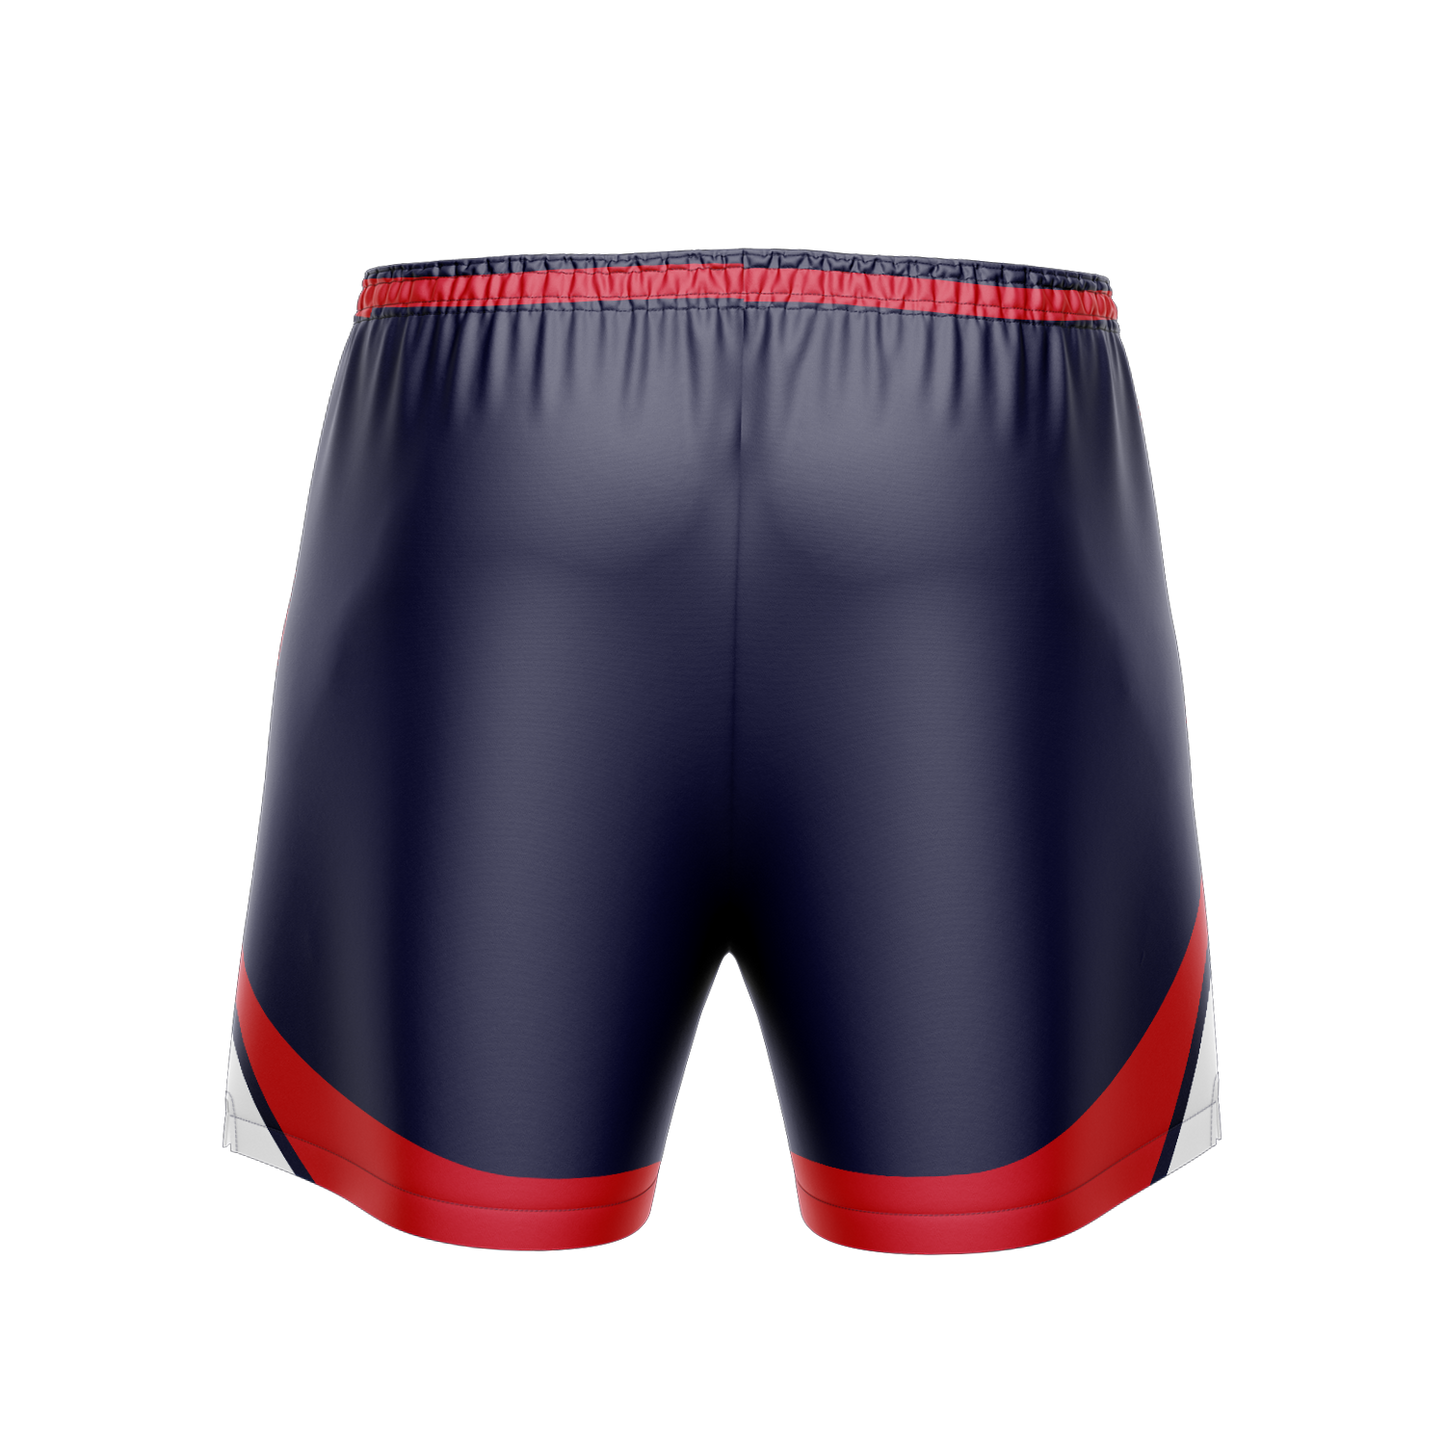 NORWOOD FLAMES CLUB PLAYER SHORTS CURVED BOTTOM (6 WEEKS FOR DELIVERY)